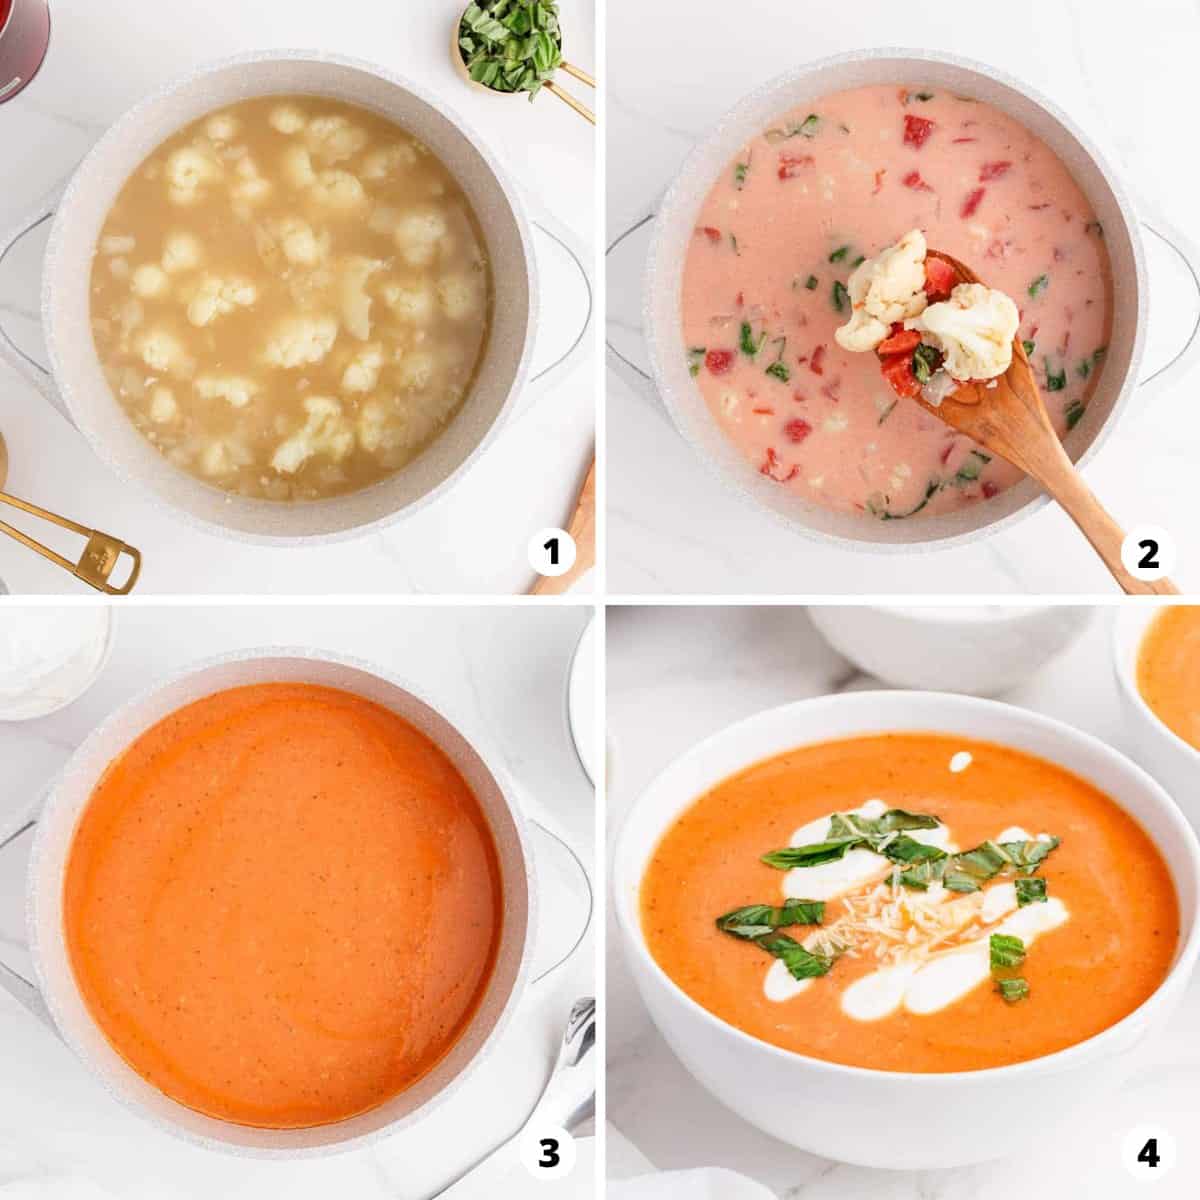 Photos showing how to make cauliflower tomato soup.